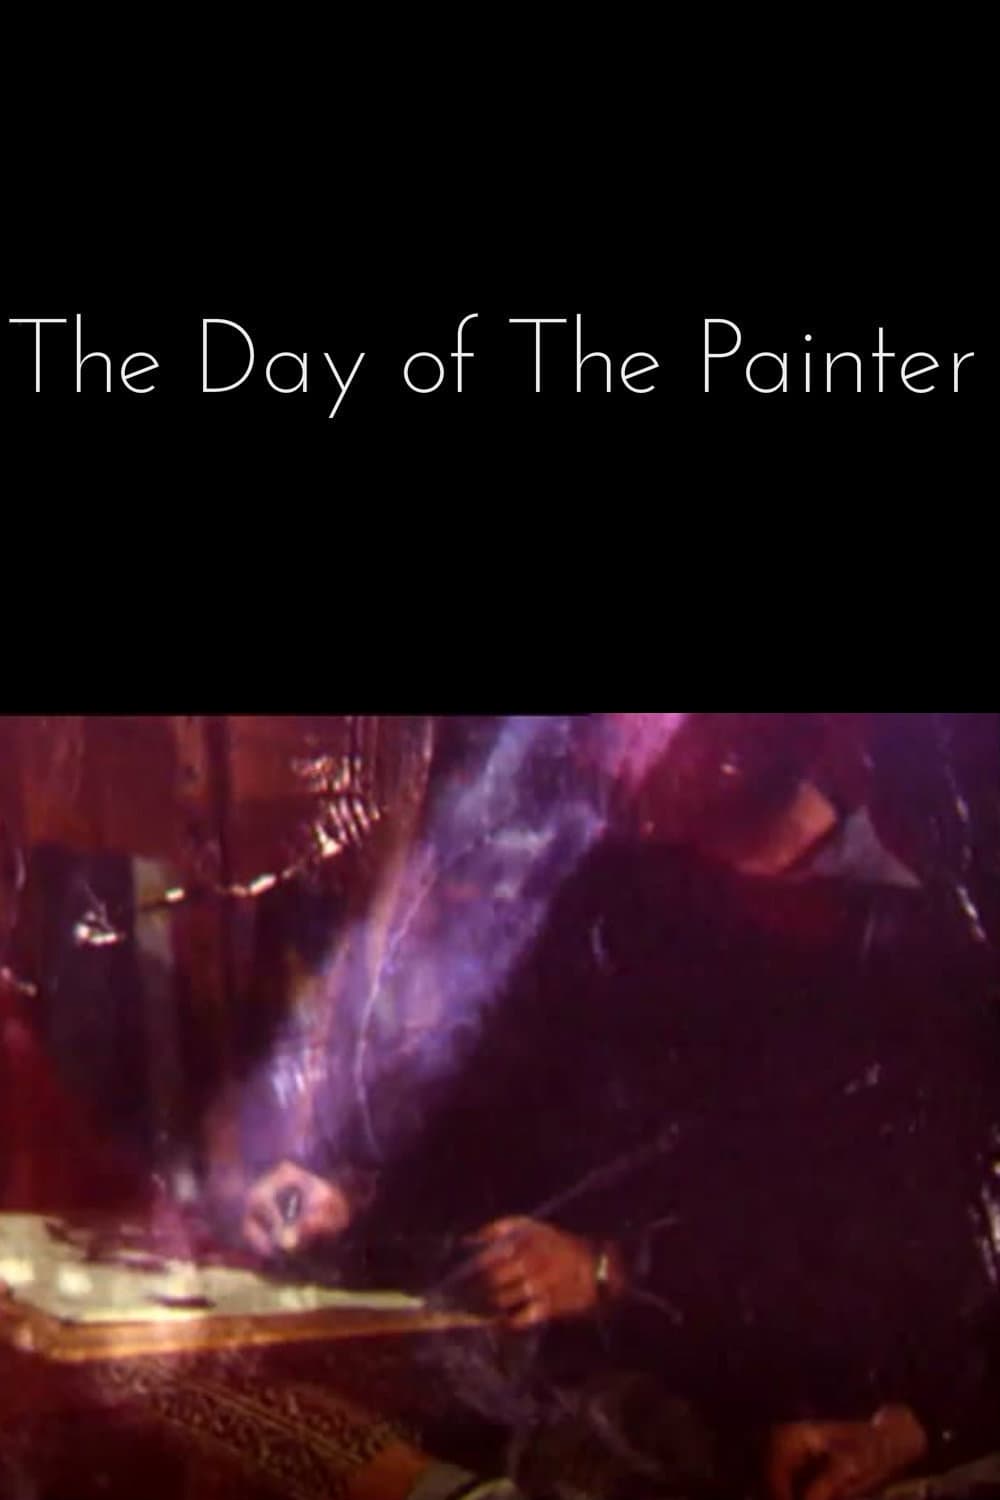 The Day of the Painter (1997)